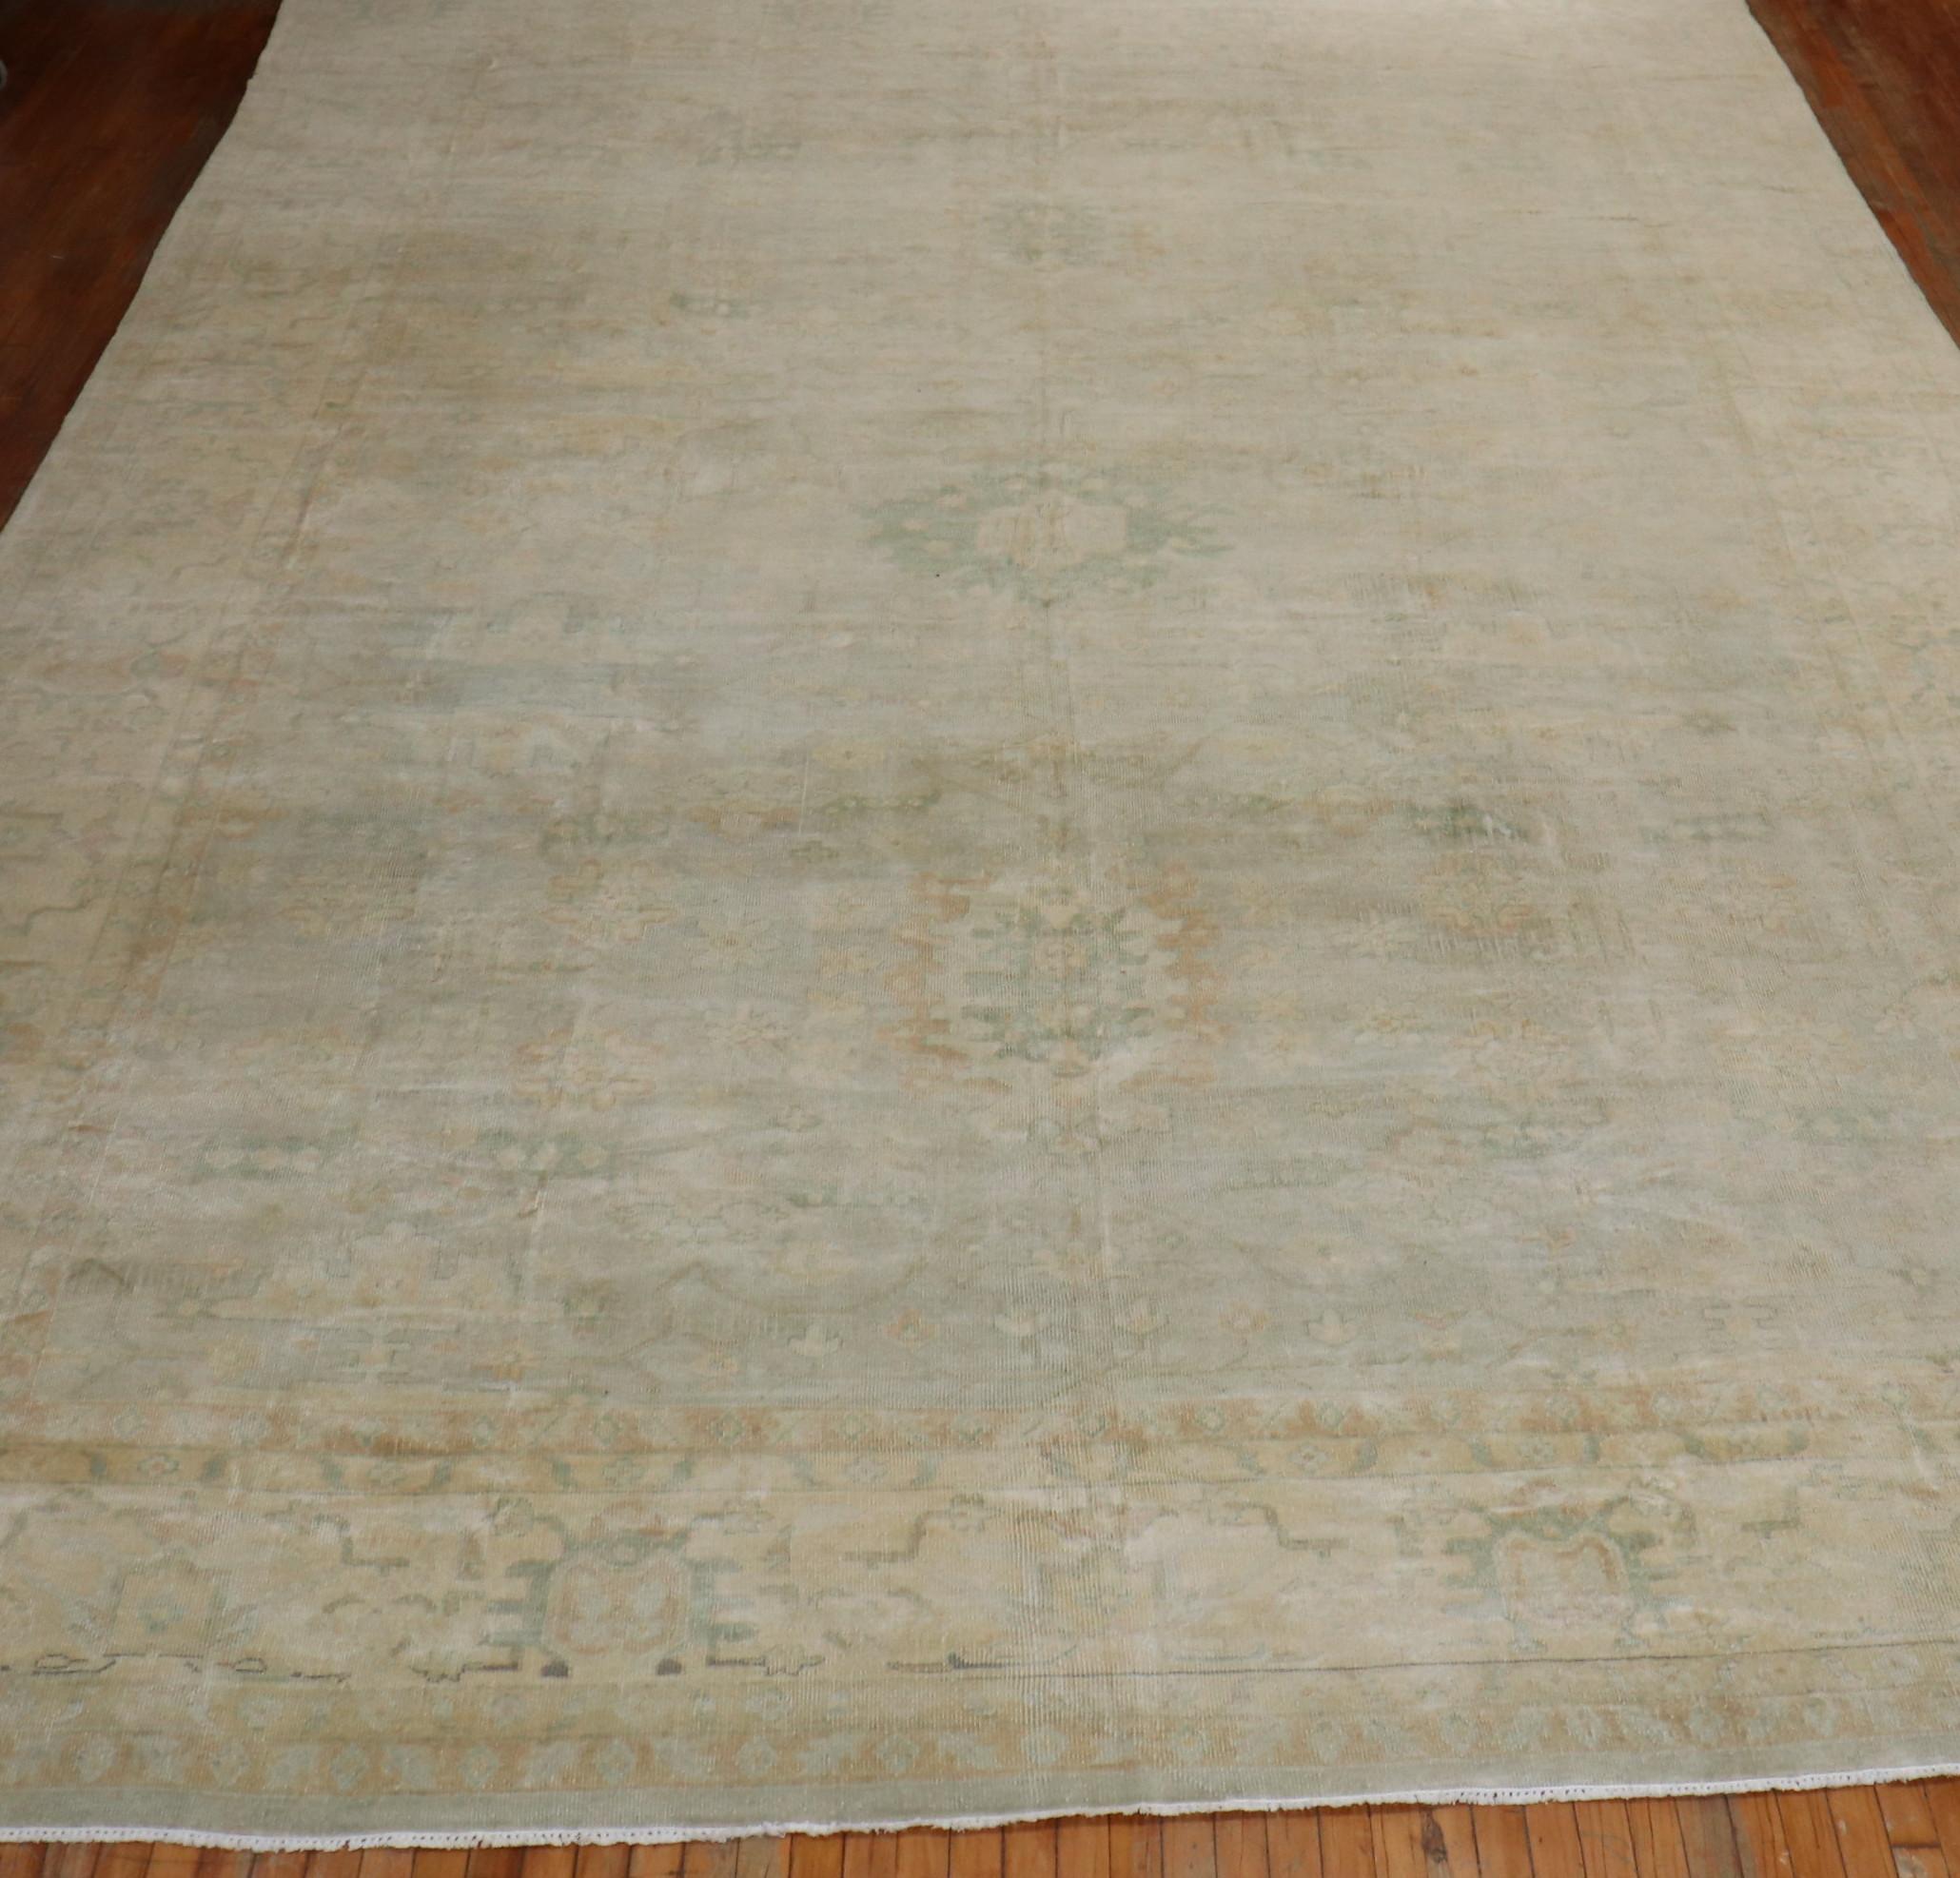 Phenomenal large size handmade Turkish Oushak in pale colors, This piece was originally custom made for a client in the 3rd quarter of the 20th century

Measures: 12'10'' x 19'10''

Oushak rugs originated in the small town of Oushak in